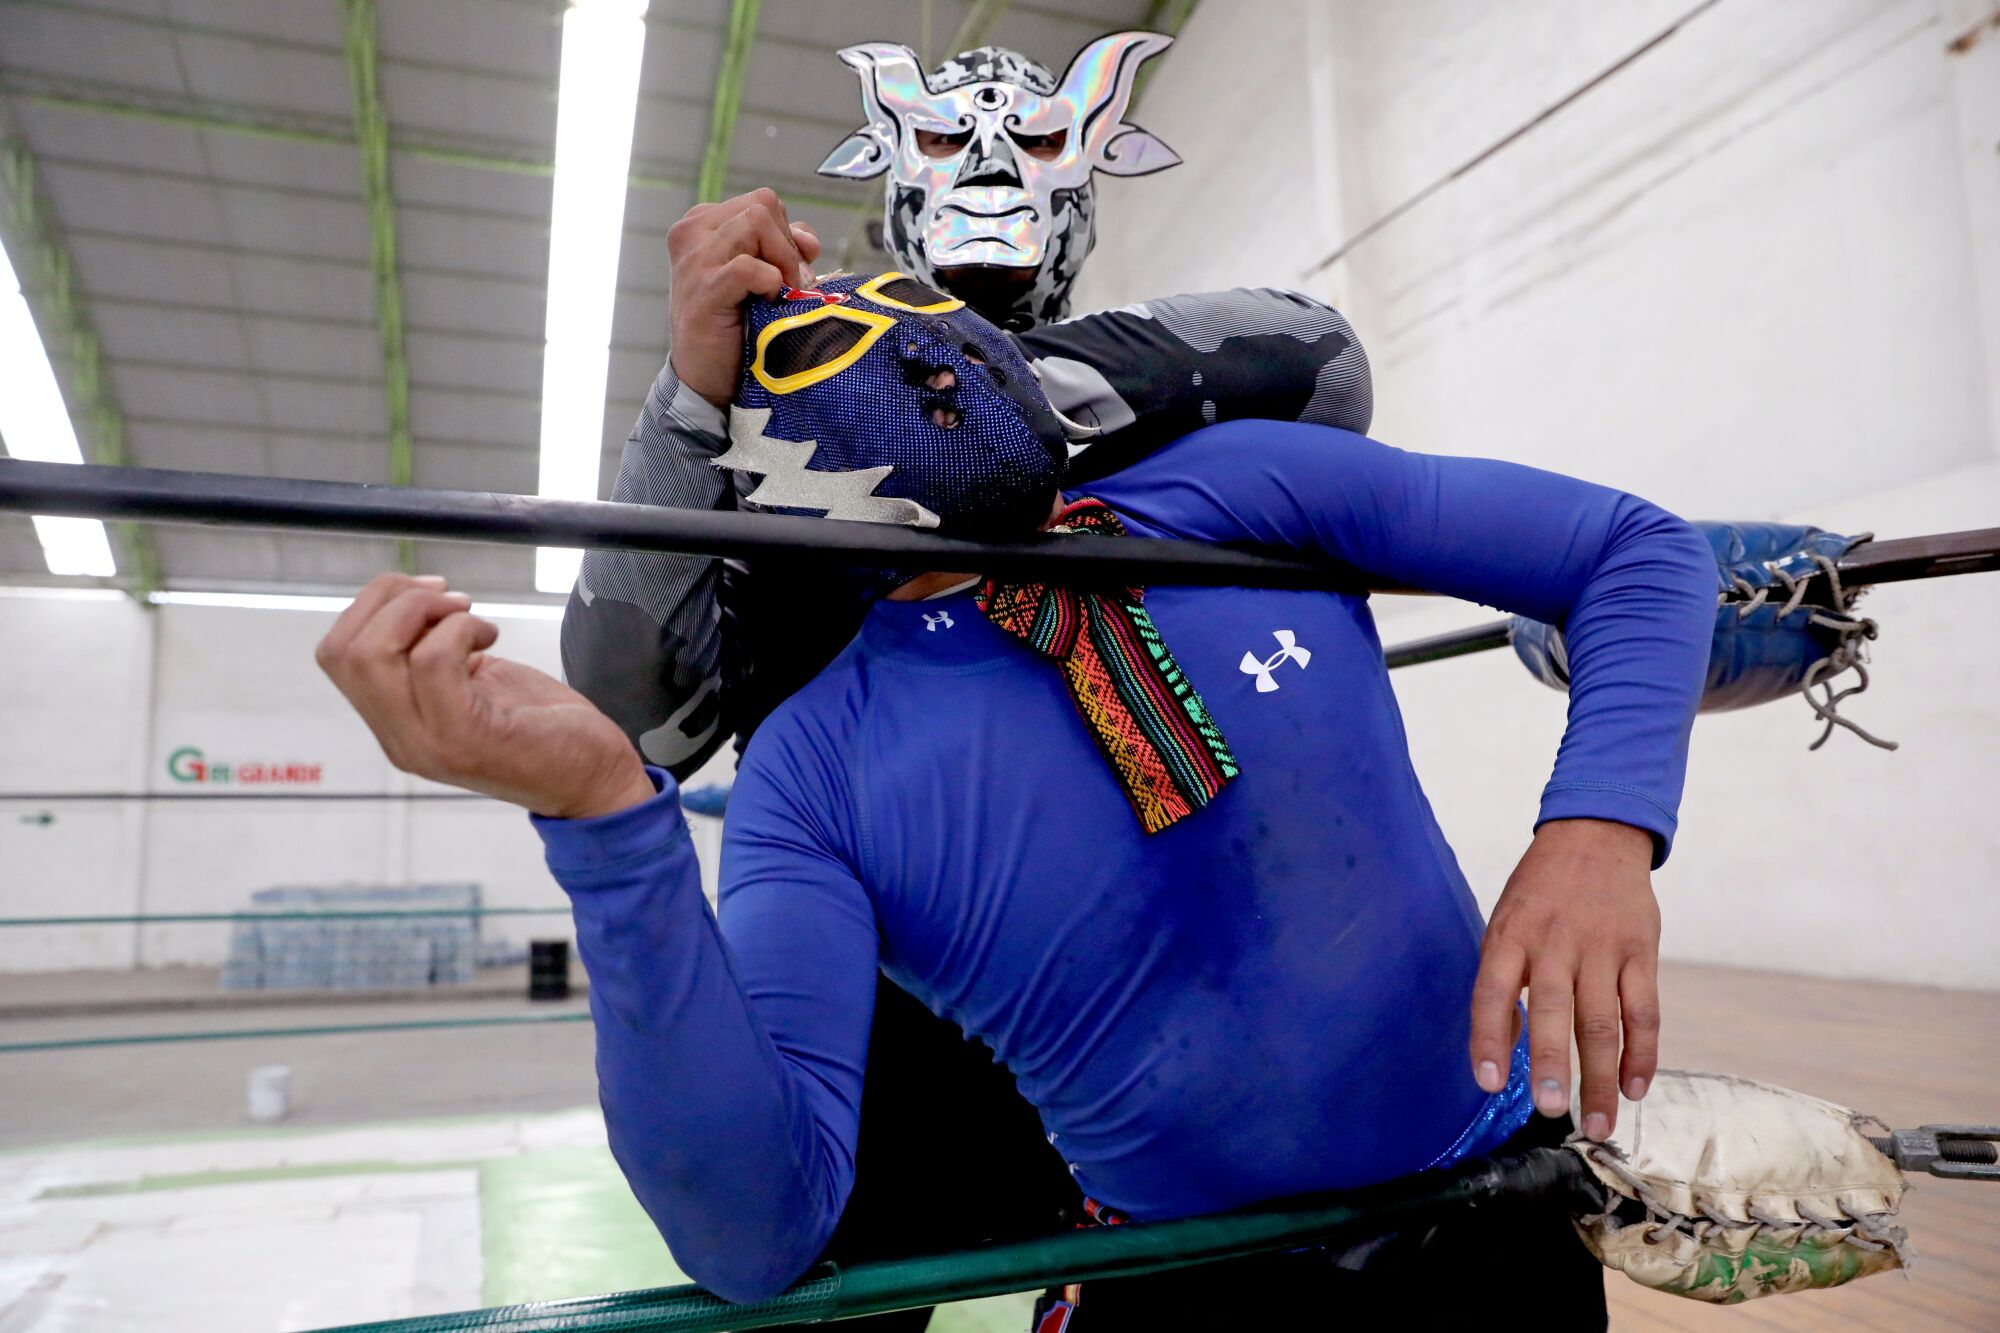 Wrestler Gran Toro has Stigma on the ropes at a lucha libre event that was broadcast online. 